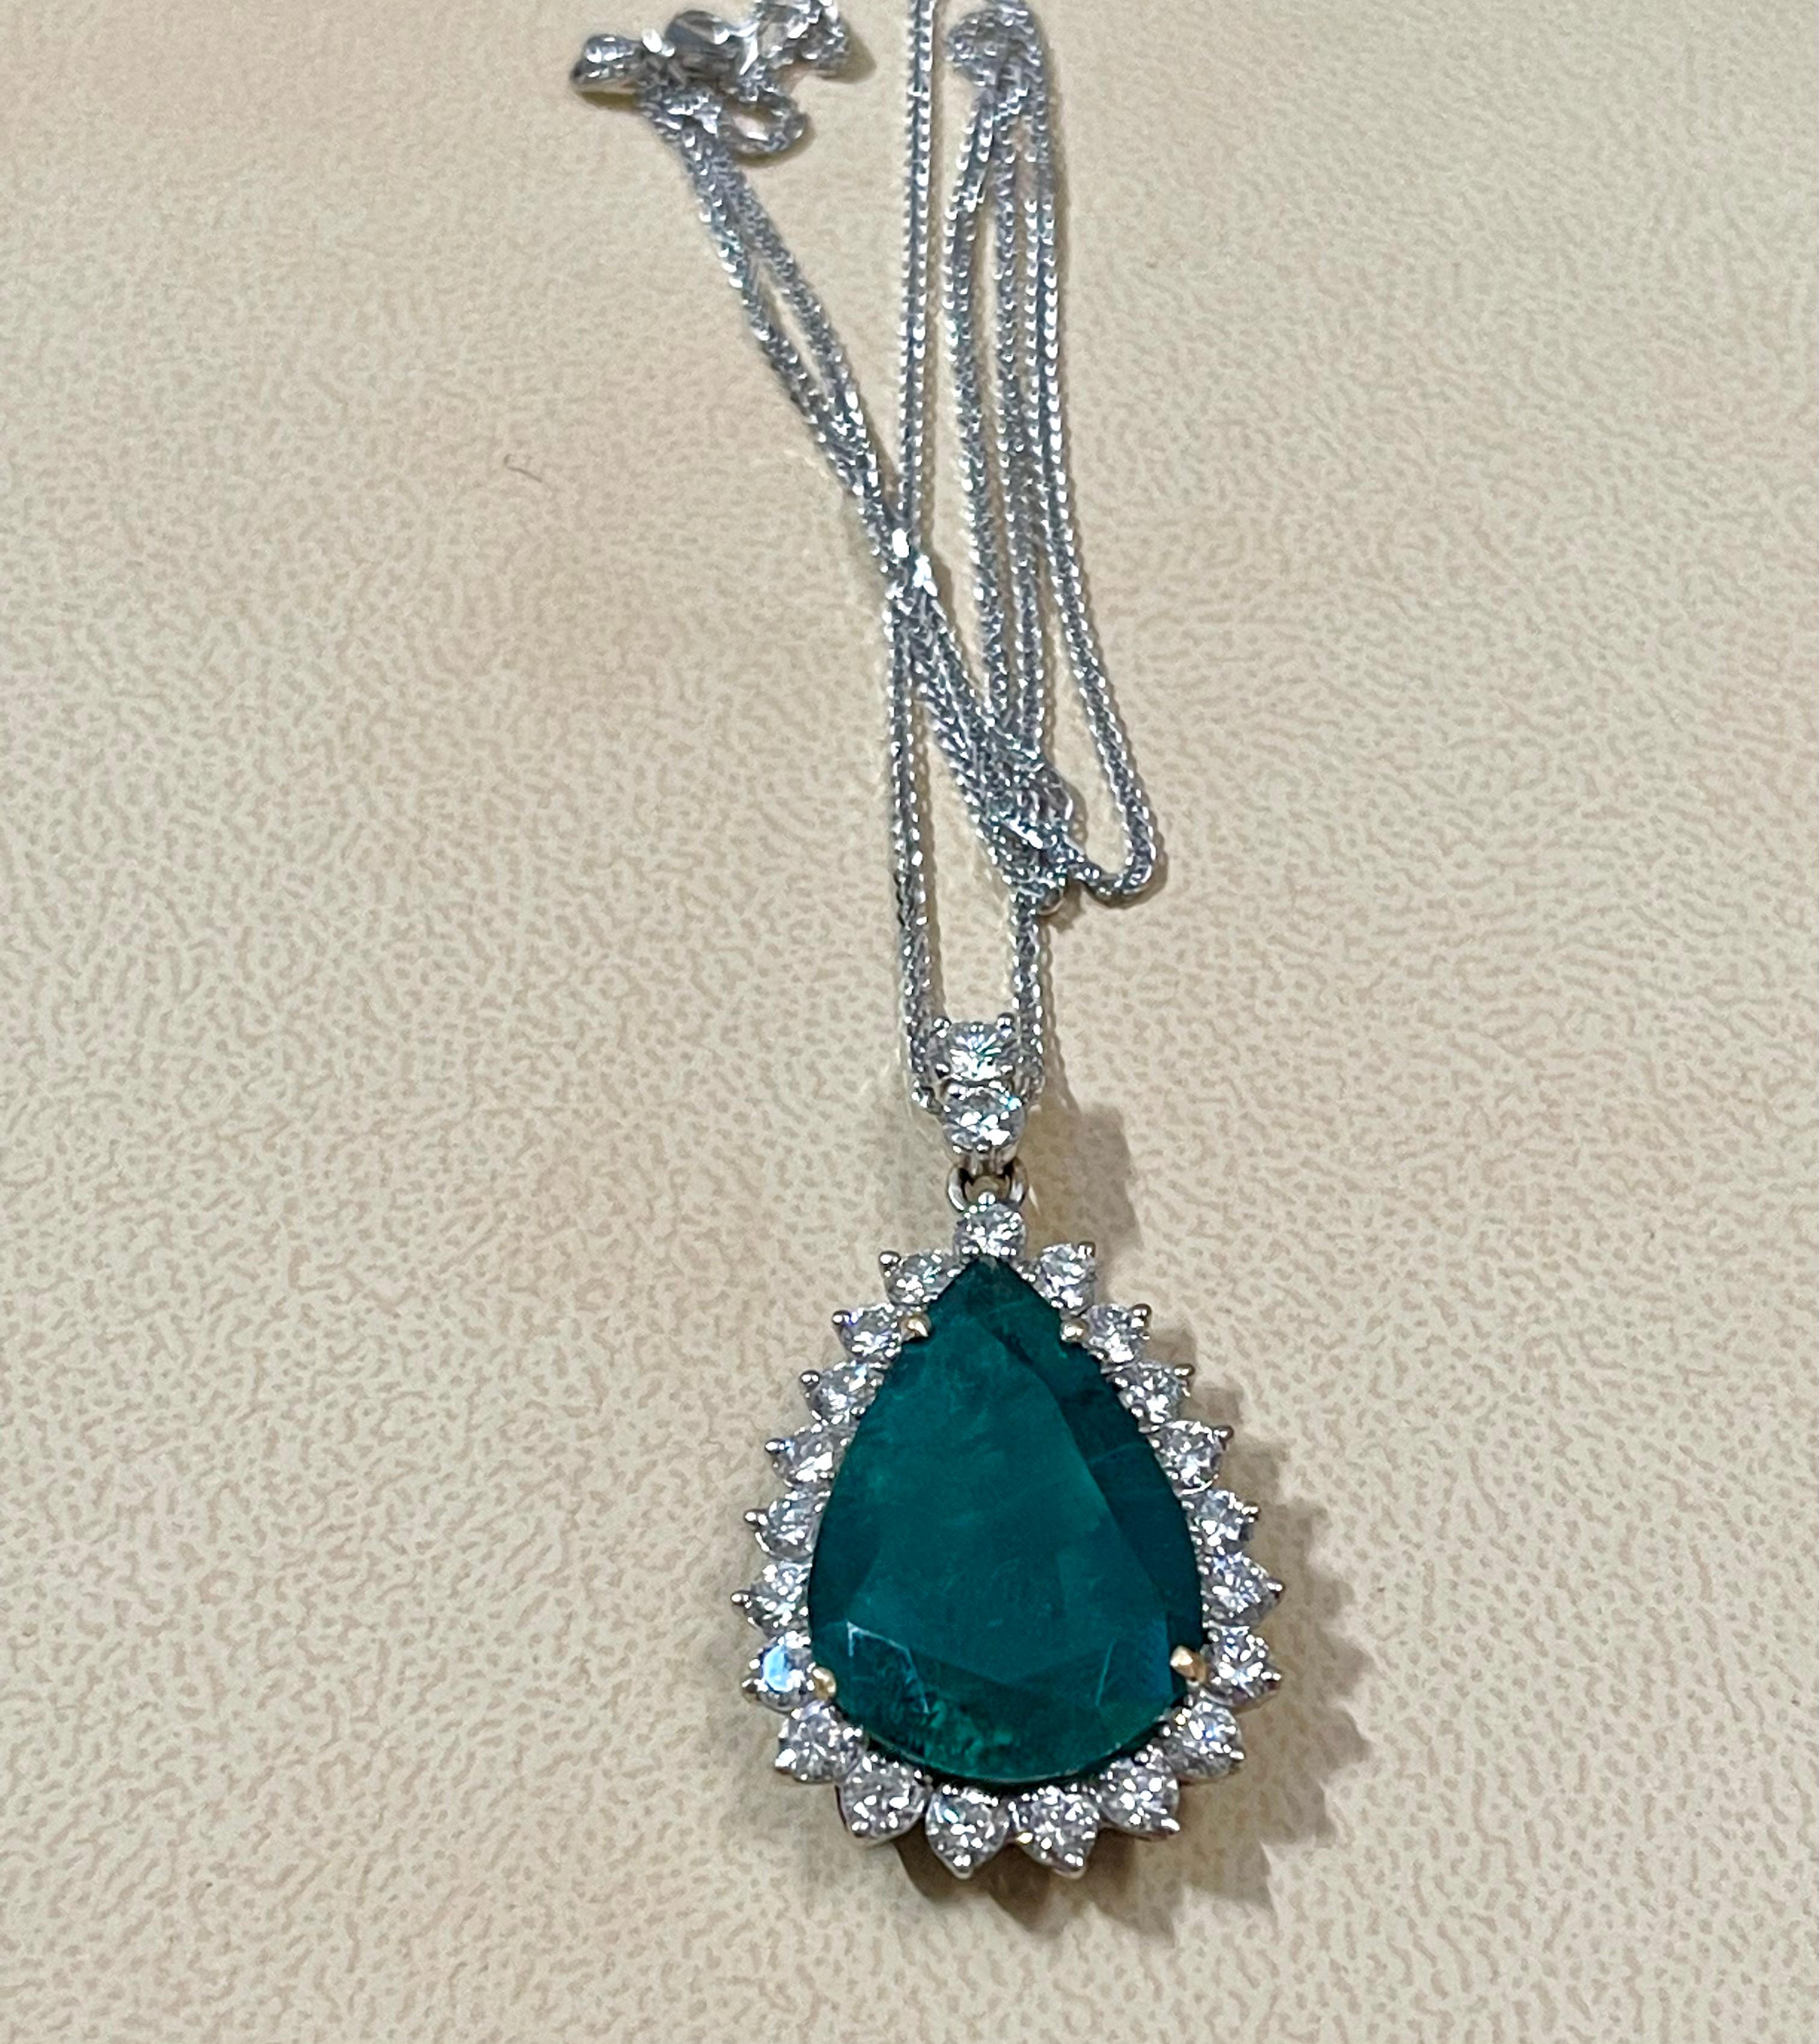 Pear Cut 15 Ct Pear Hydro Emerald & 4 Ct Diamond Pendent/Necklace 18 Kt White Gold For Sale